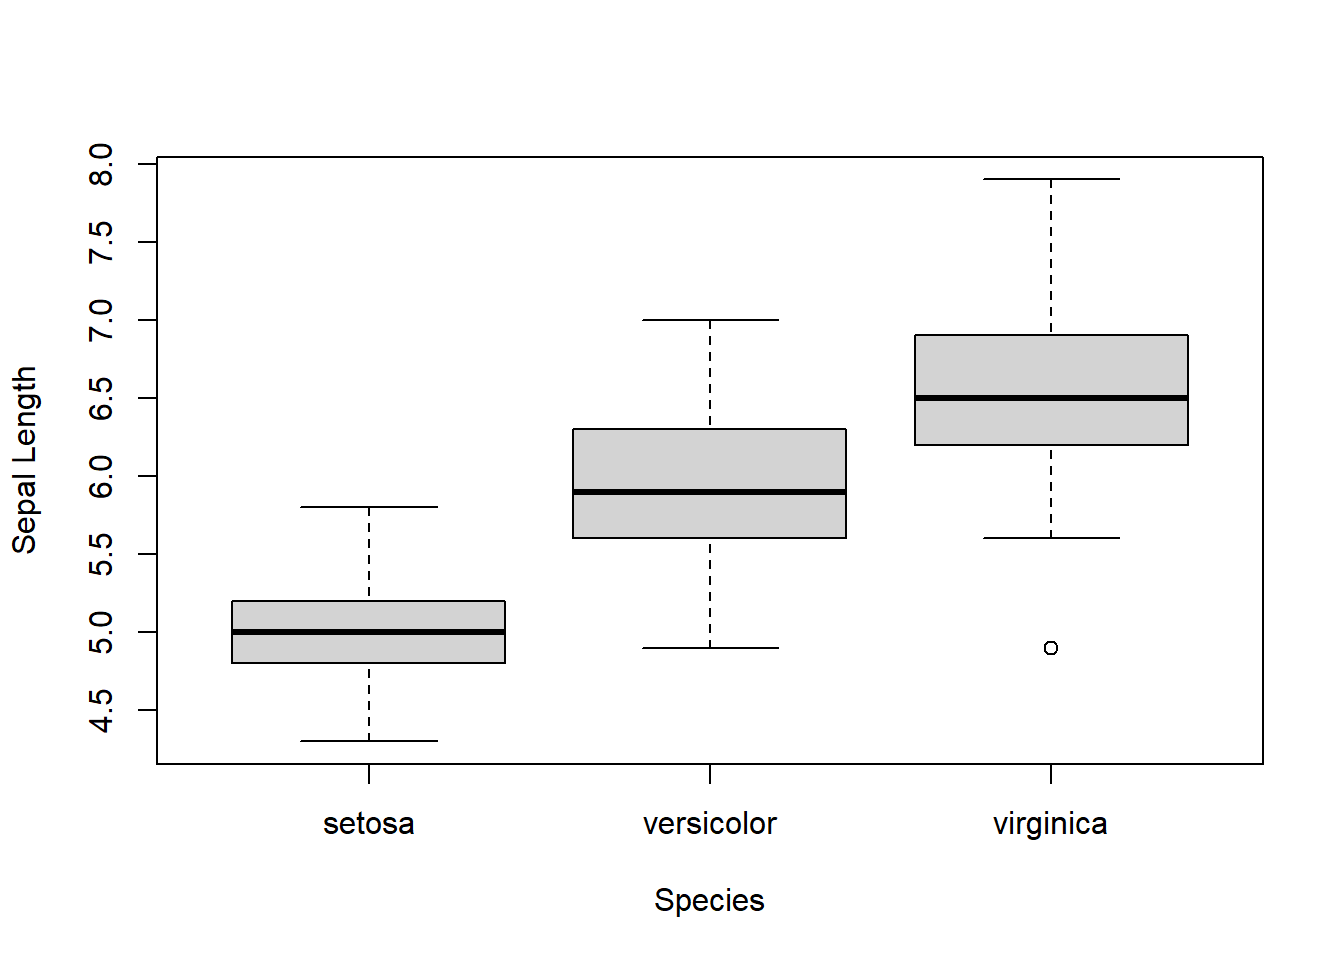 Box plot of sepal length by species